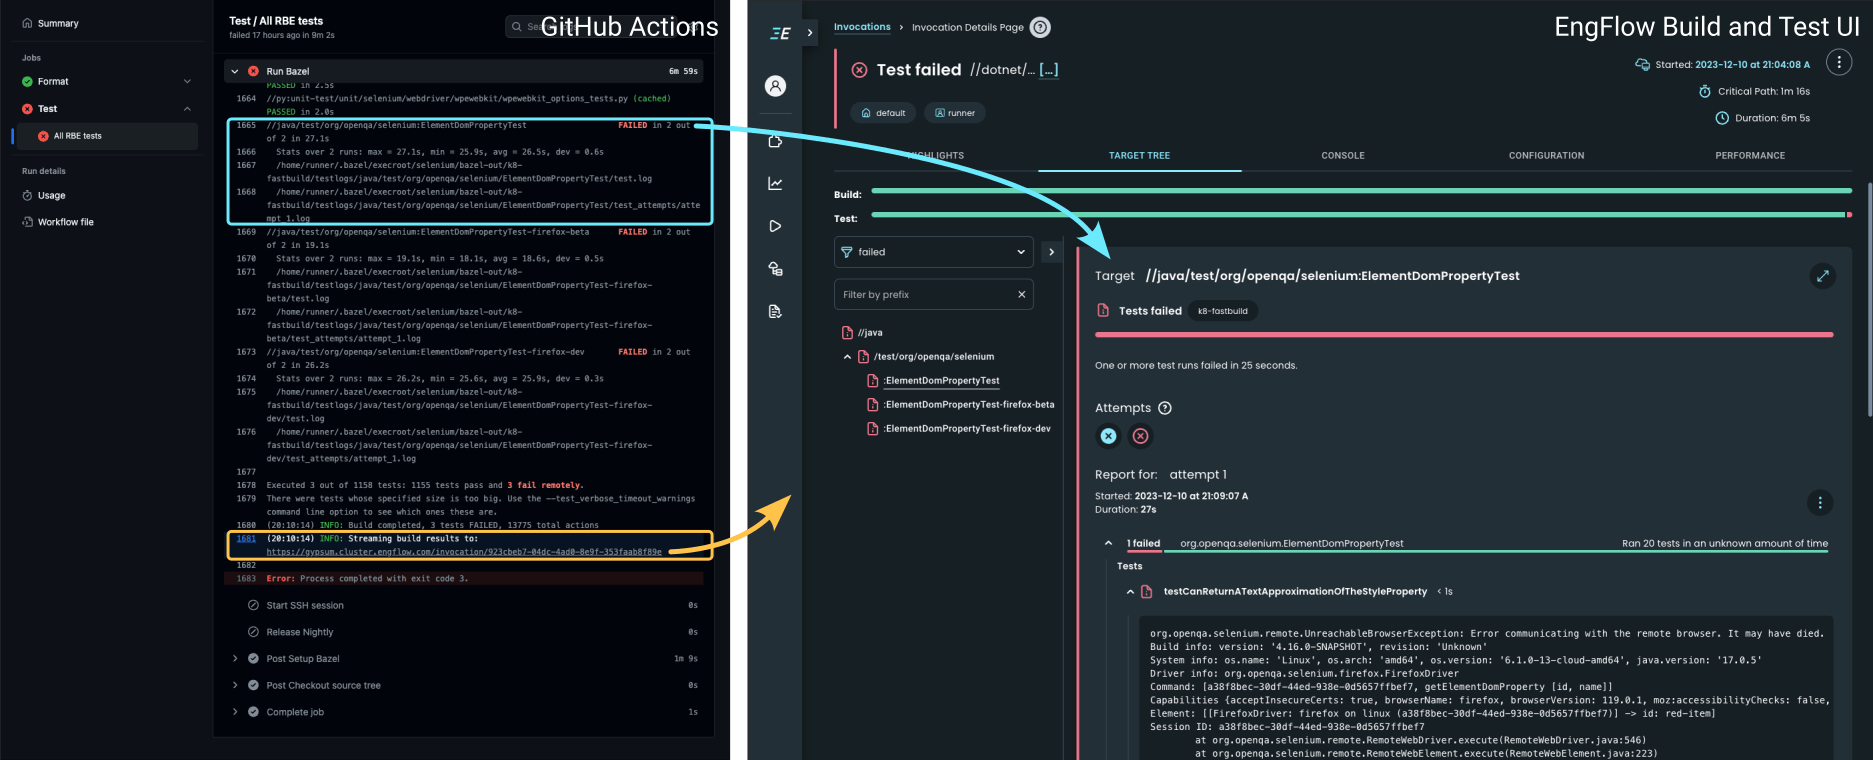 Left: GitHub Actions page with link to EngFlow Build and Test UI; Right: EngFlow Build and Test UI, showing a richer and more actionable view of a Bazel test failure